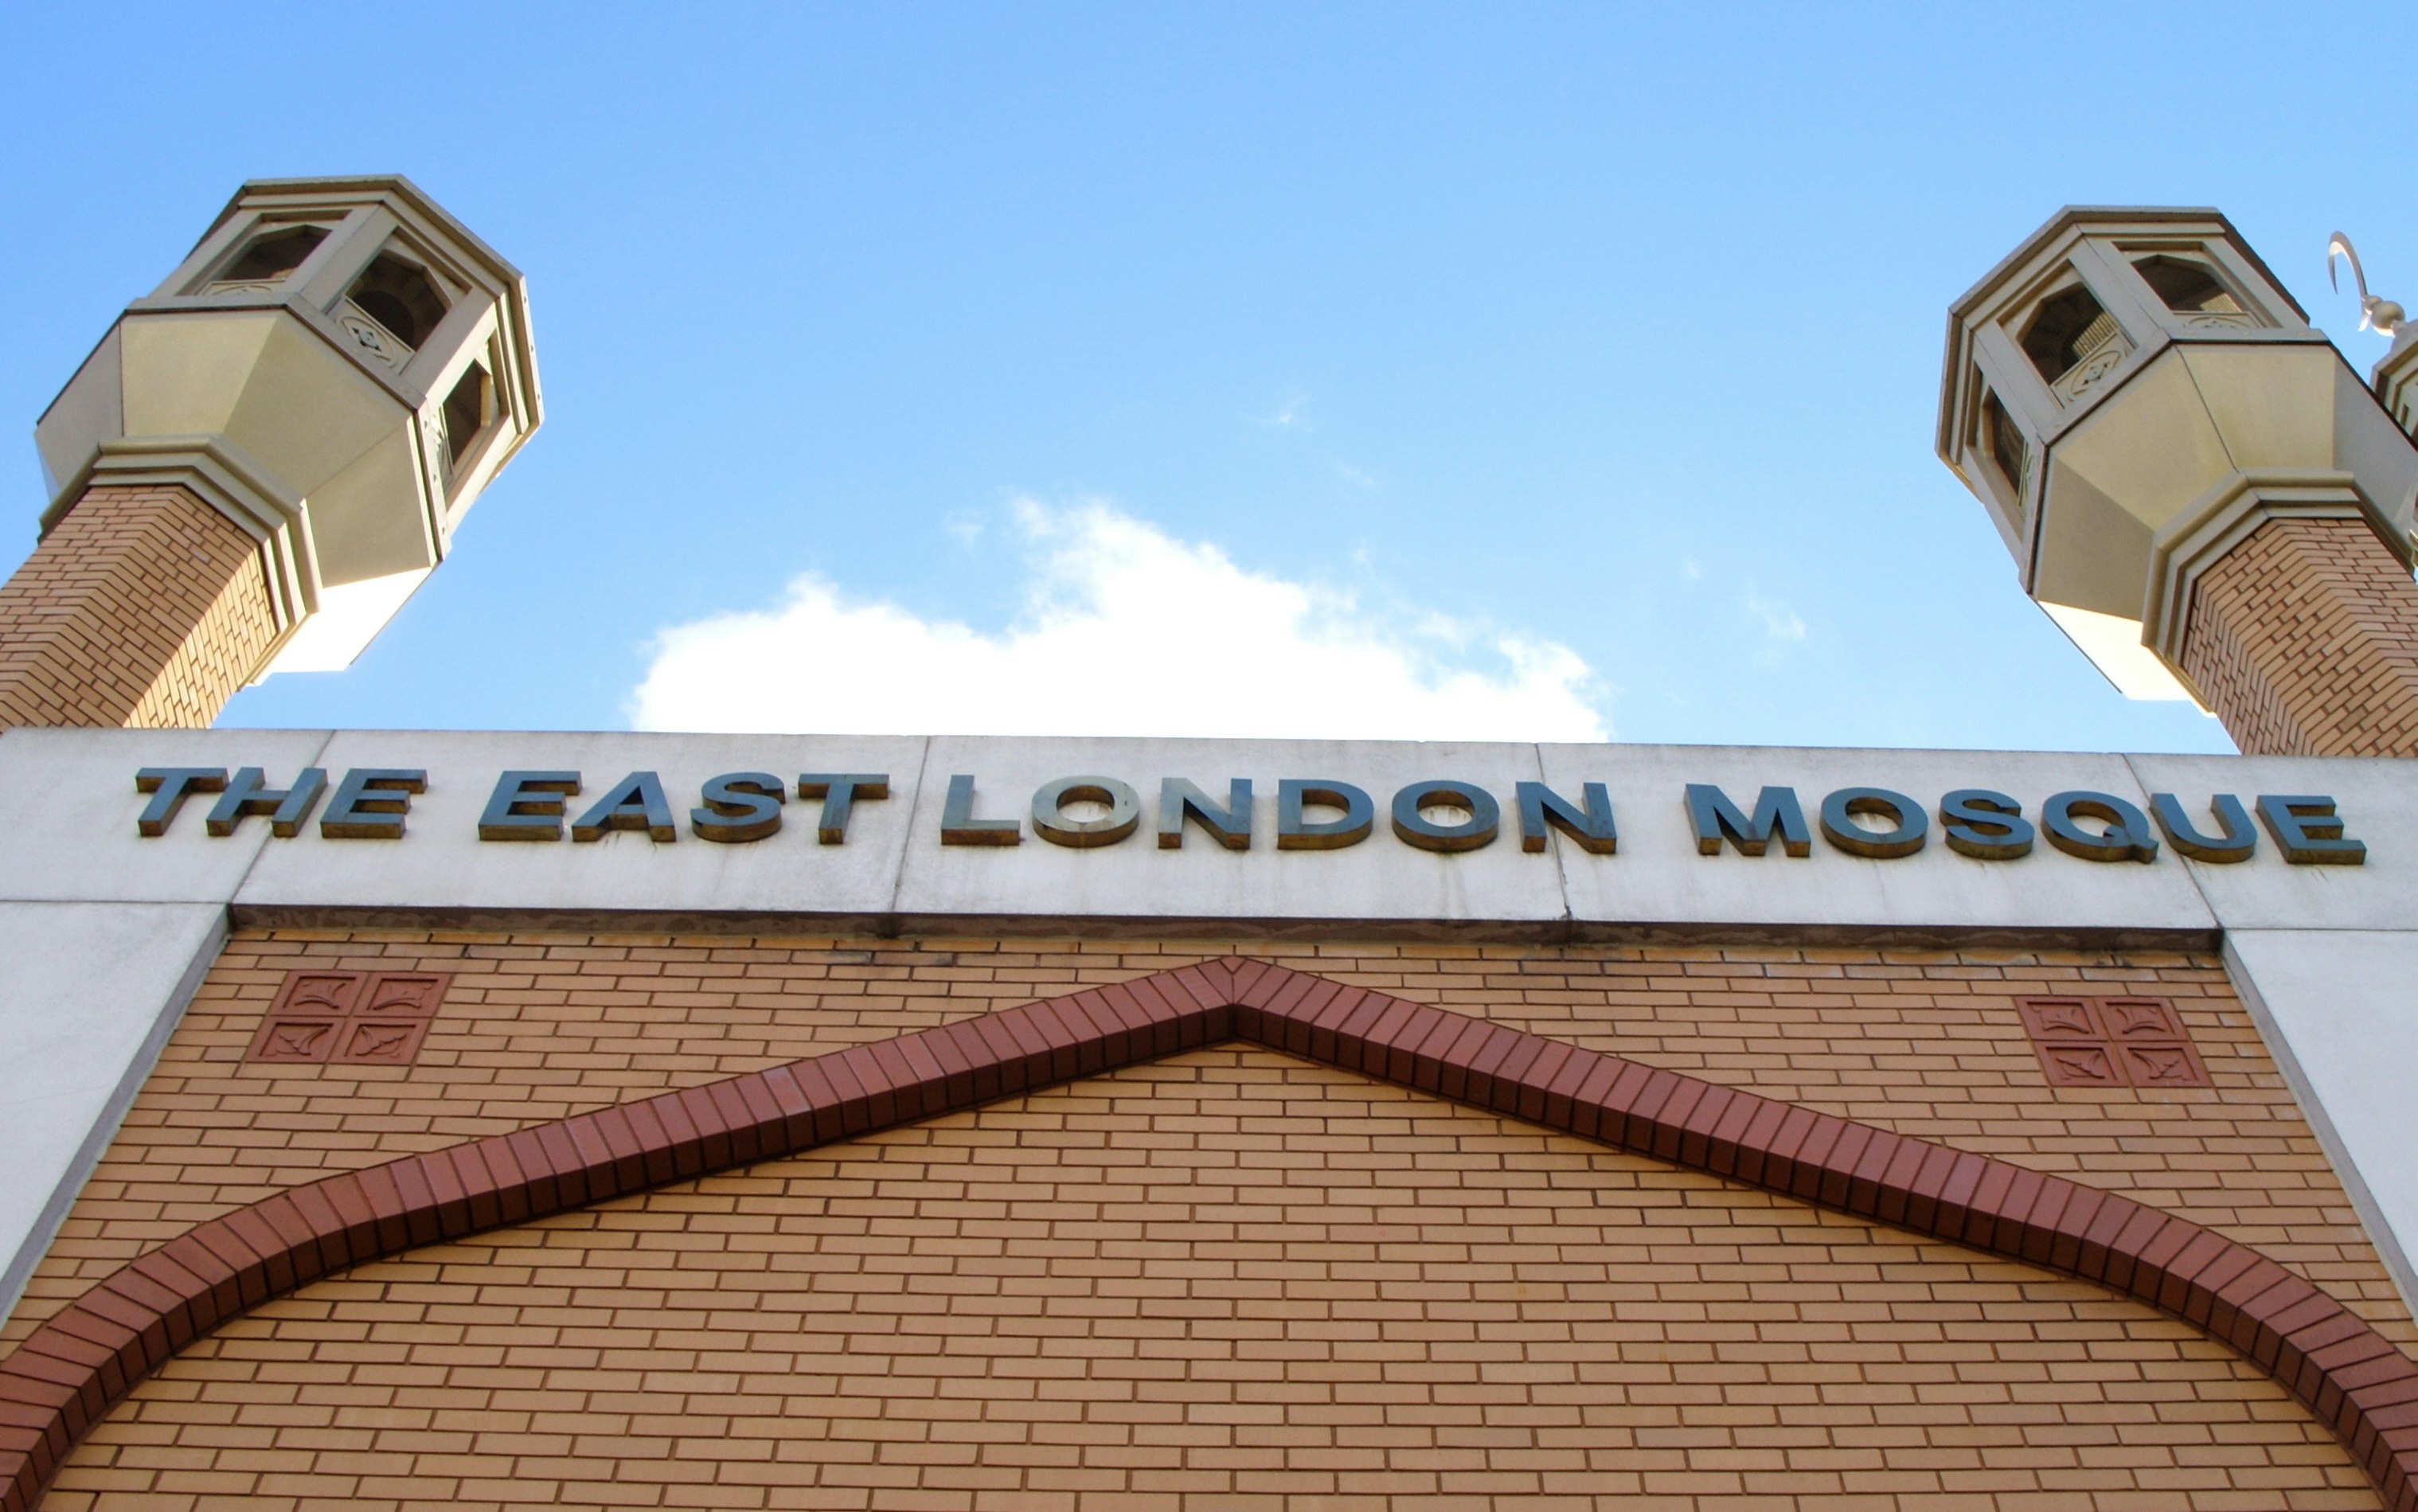 East london mosque.; Shutterstock ID 8734069; Your name (First / Last): Josh Vogel; GL account no.: 56530; Netsuite department name: Online Design; Full Product or Project name including edition: Digital Content/Sights